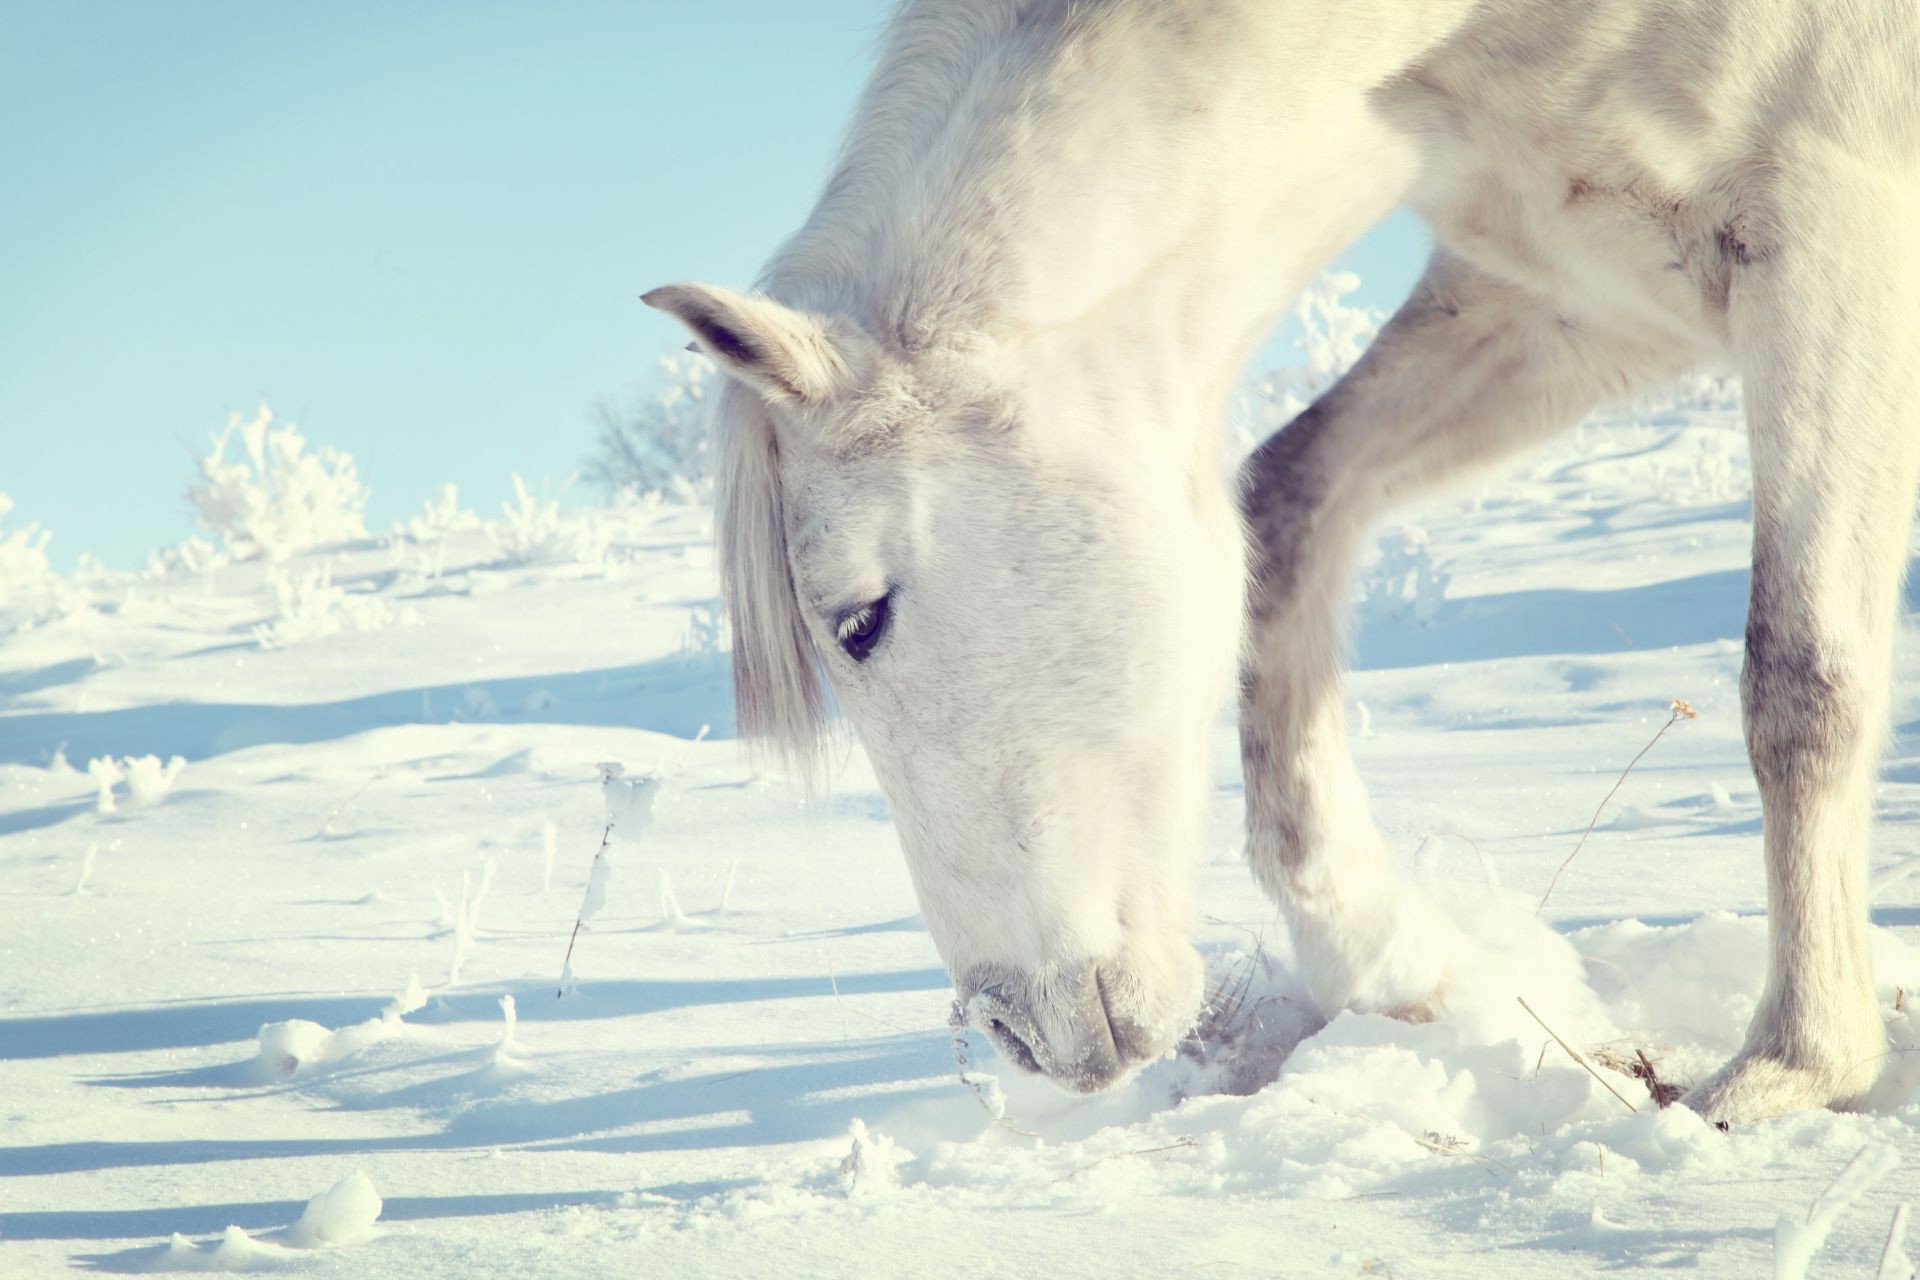 horses snow winter cold ice frosty nature mammal frost frozen outdoors animal wildlife landscape one